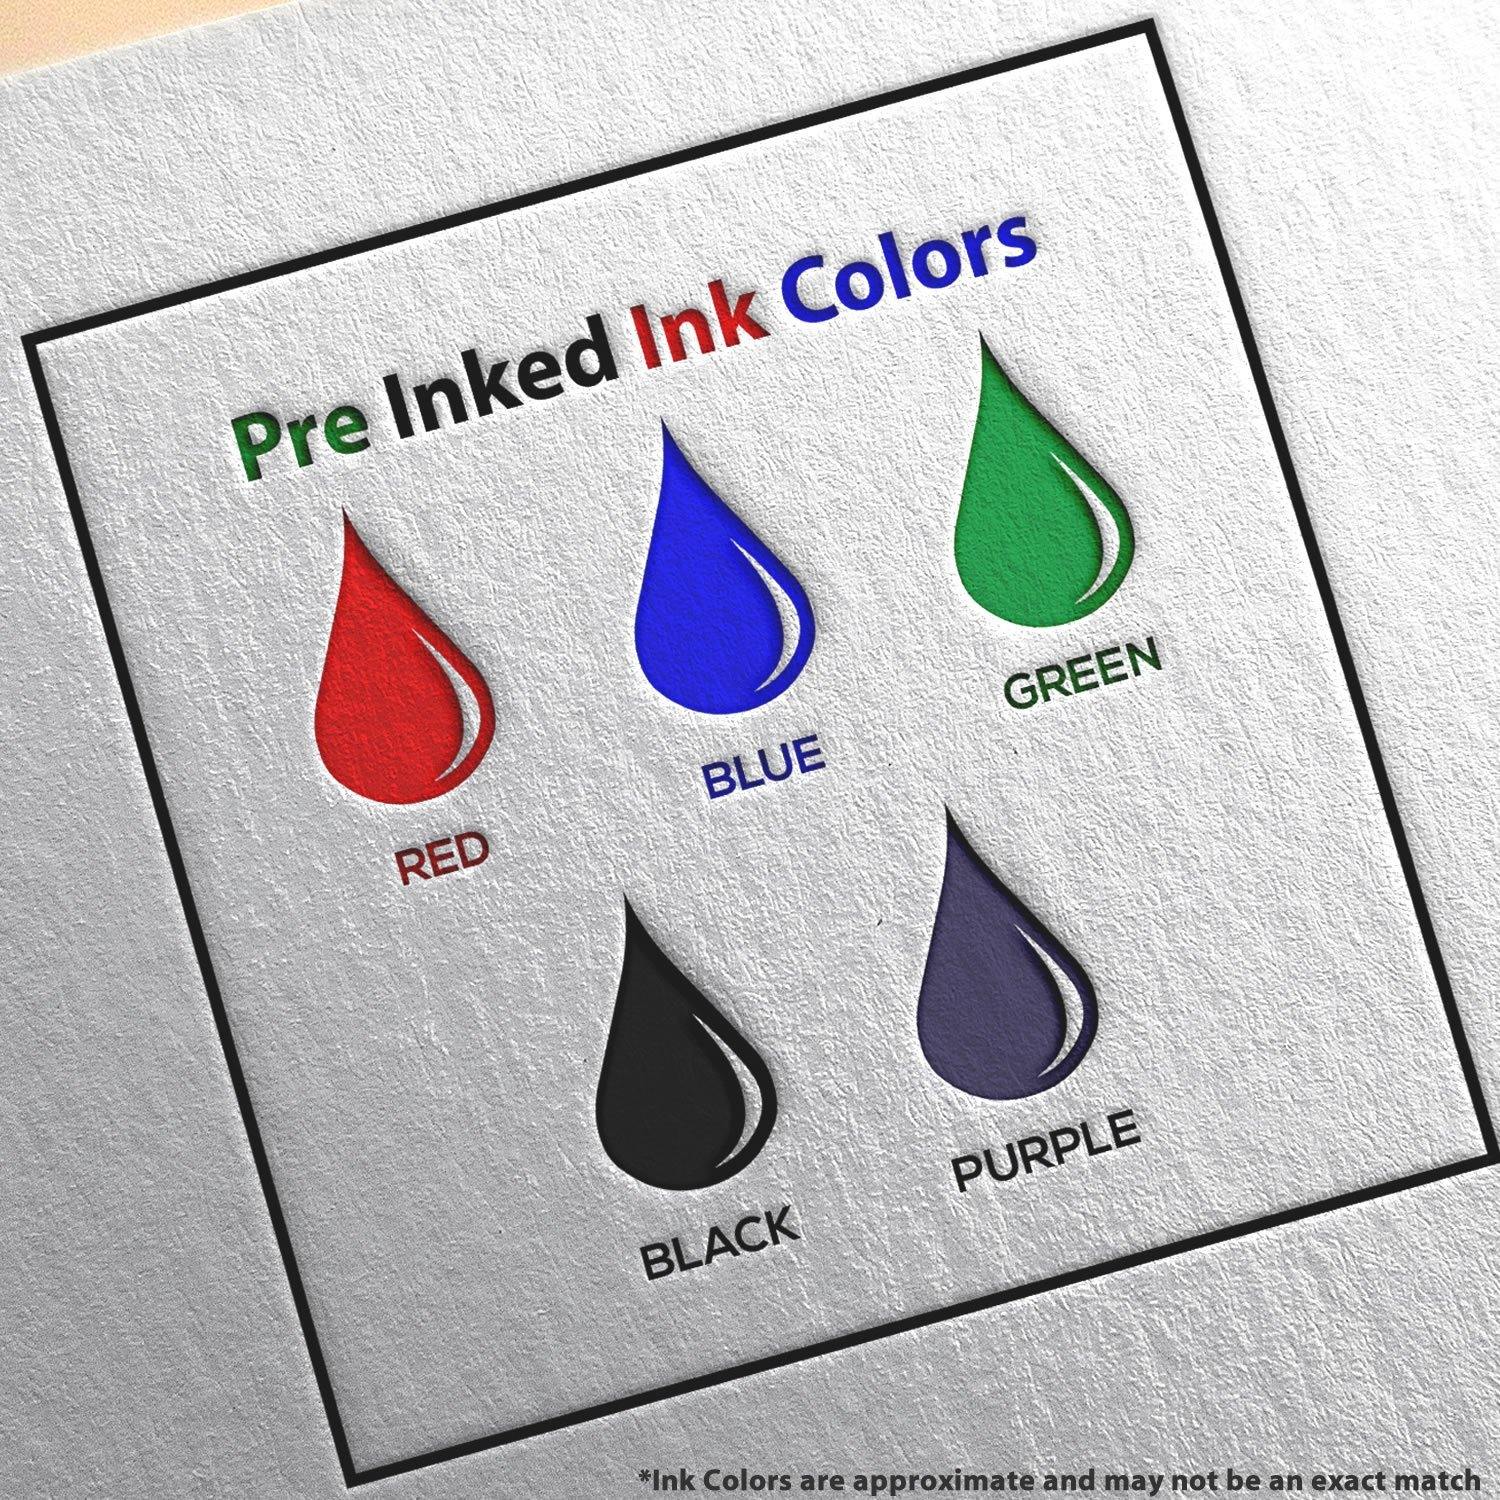 Slim Pre-Inked Narrow Font Non-Smoker Stamp Ink Color Options